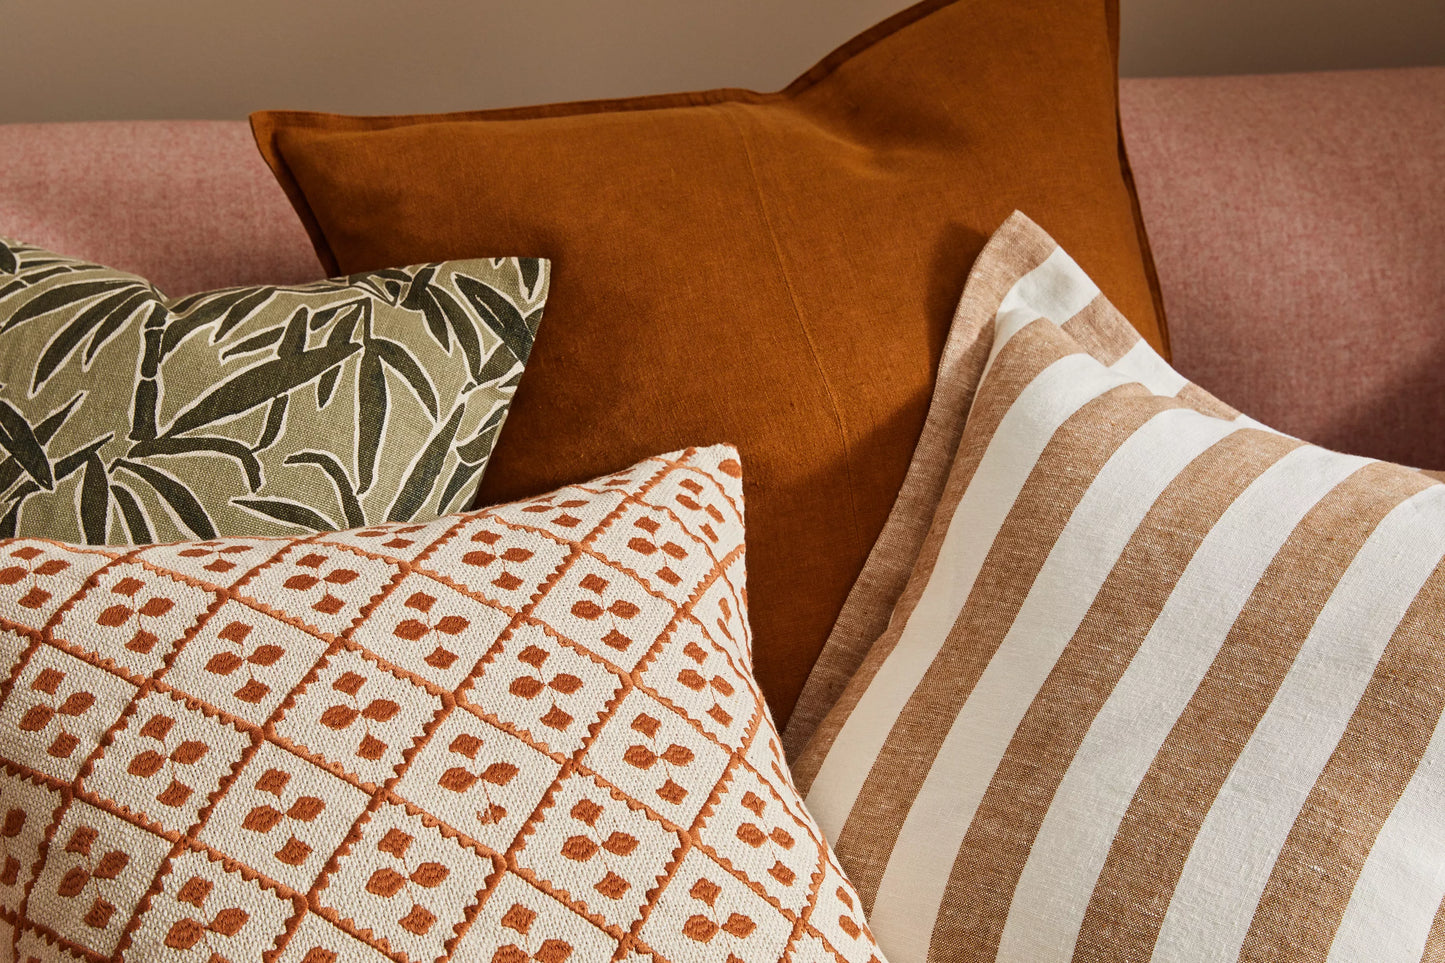 Byblos cushion from Weave 